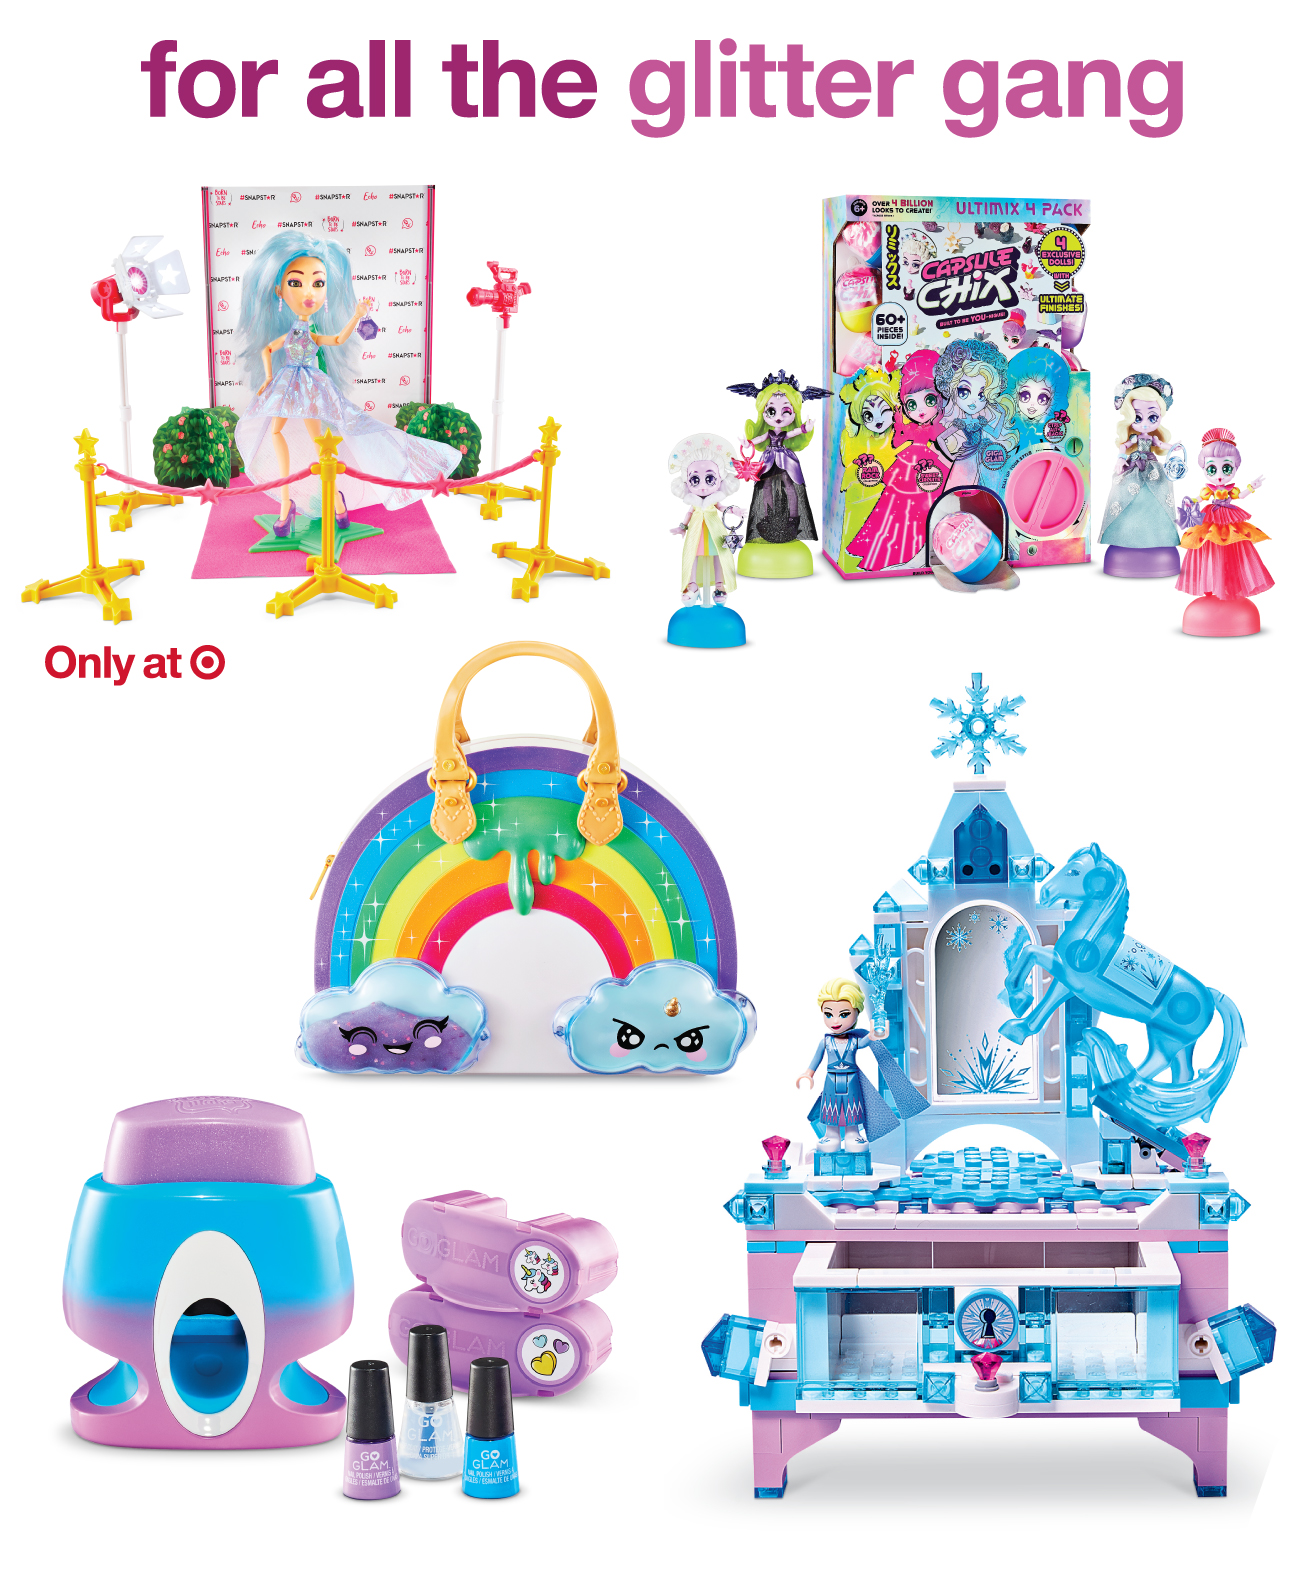 A collage of sparkly toys